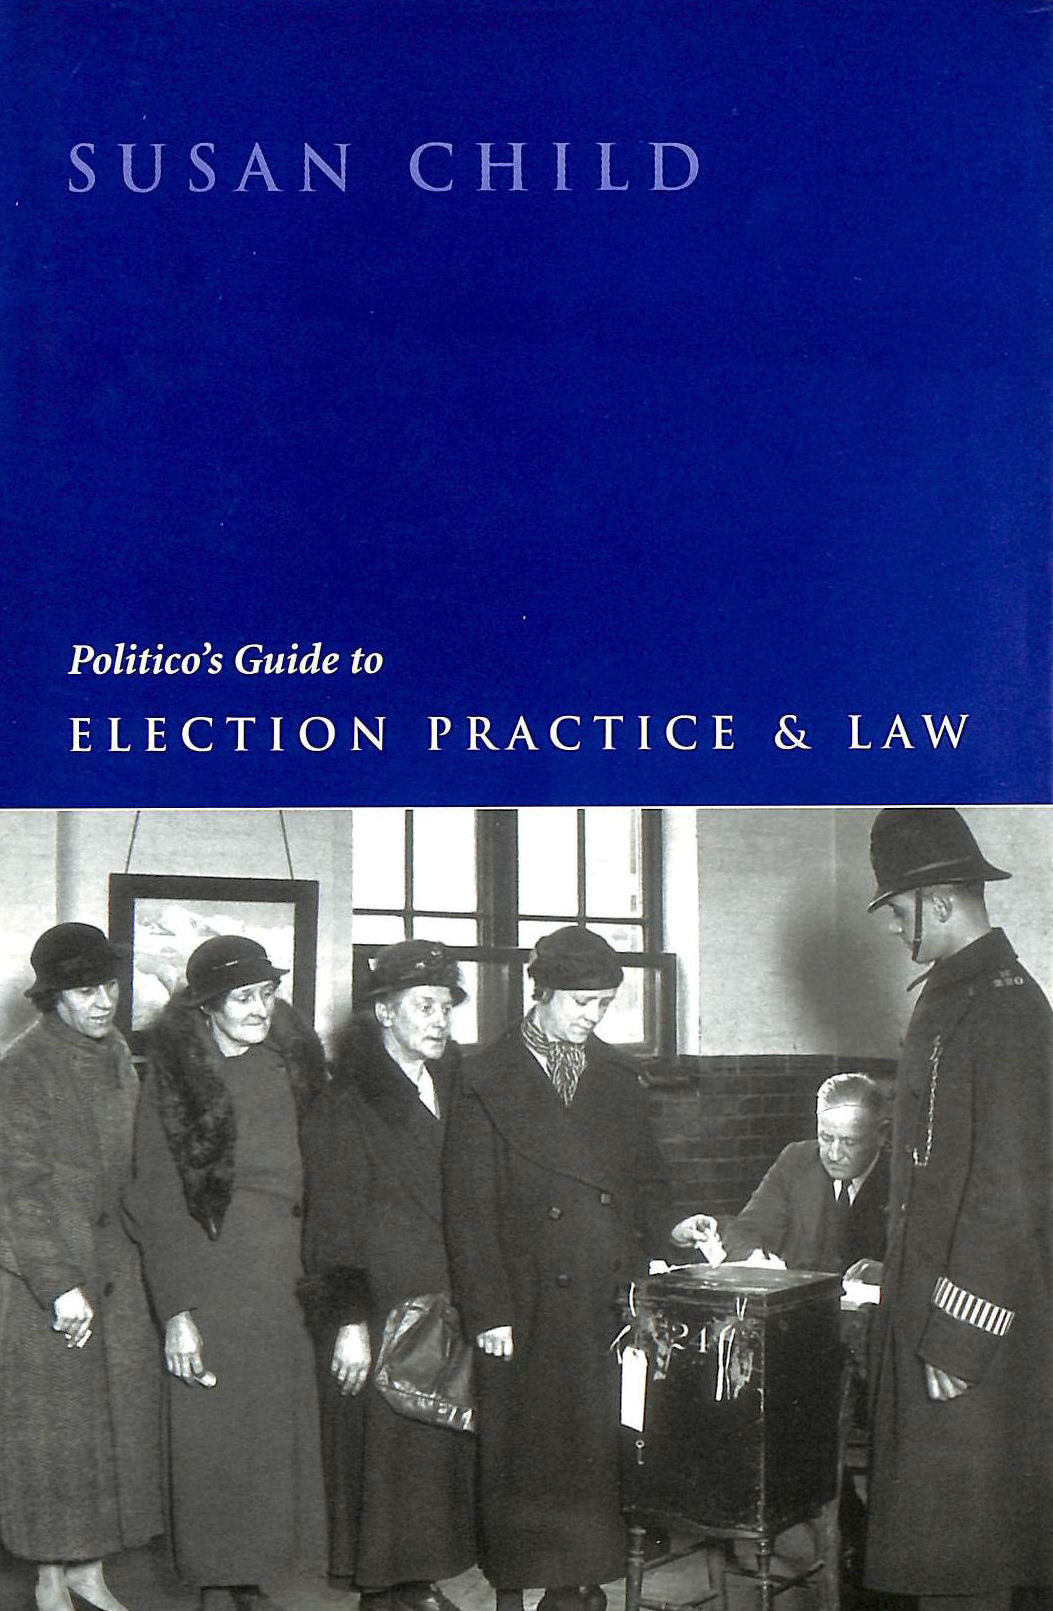 CHILD, SUSAN - Politico's Guide to Election Practice and Law